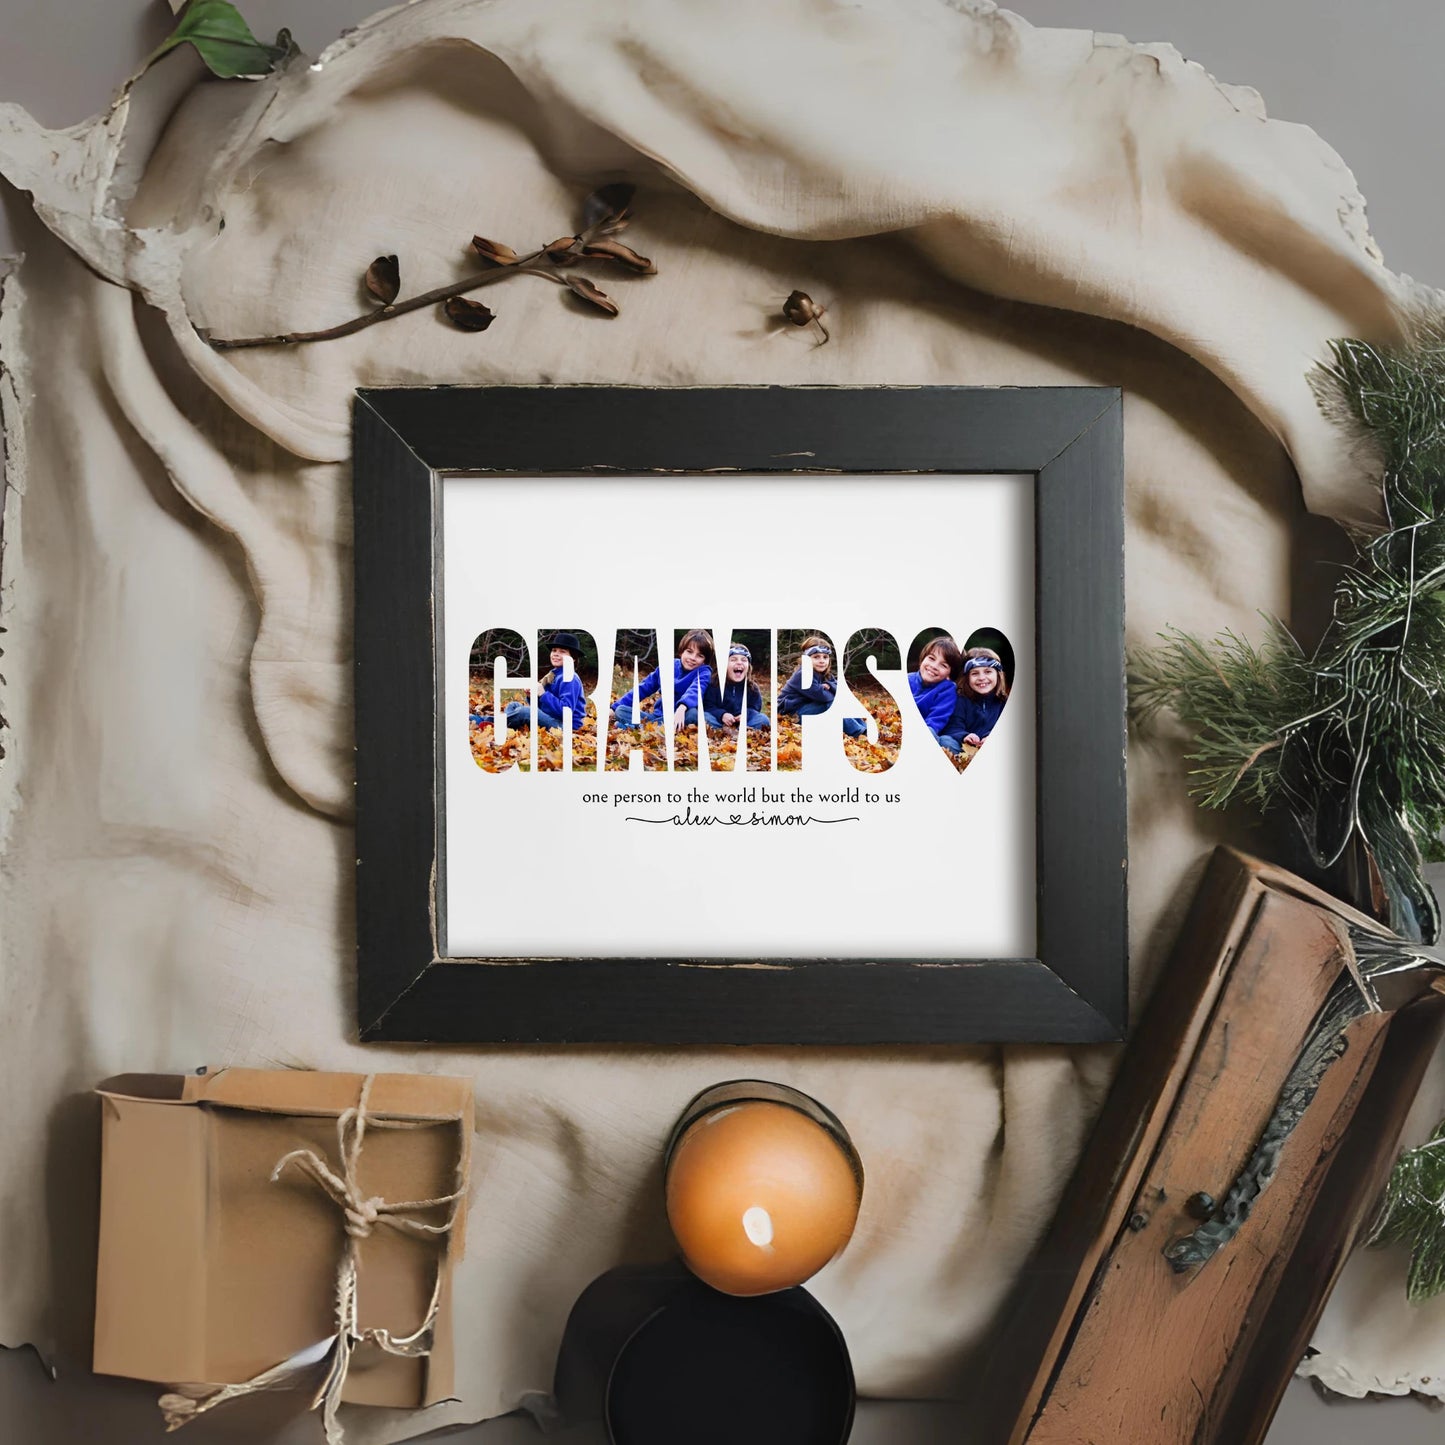 Editable Gramps Photo Collage Template by Playful Pixie Studio